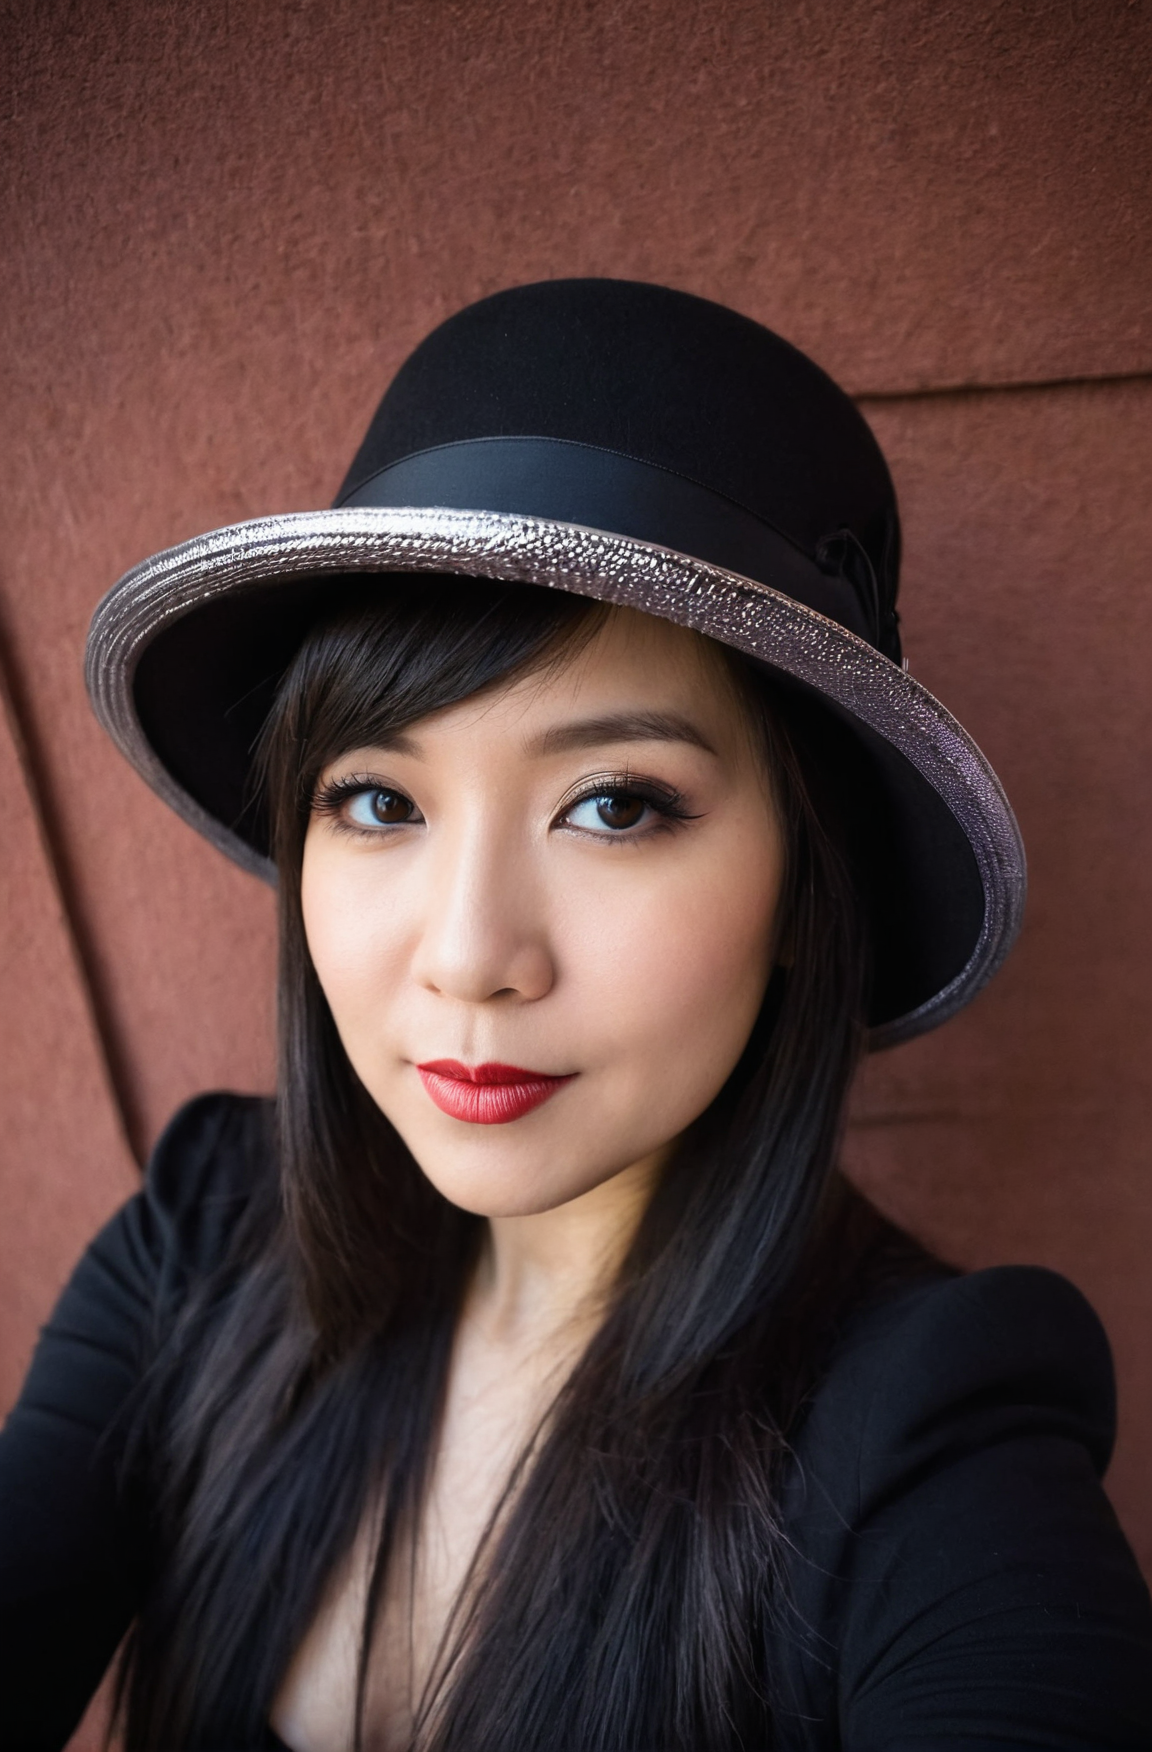 A woman wearing a hat poses for a picture, in the style of oshare kei, black, wide lens, shiny/ glossy, solapunk, dark sil...